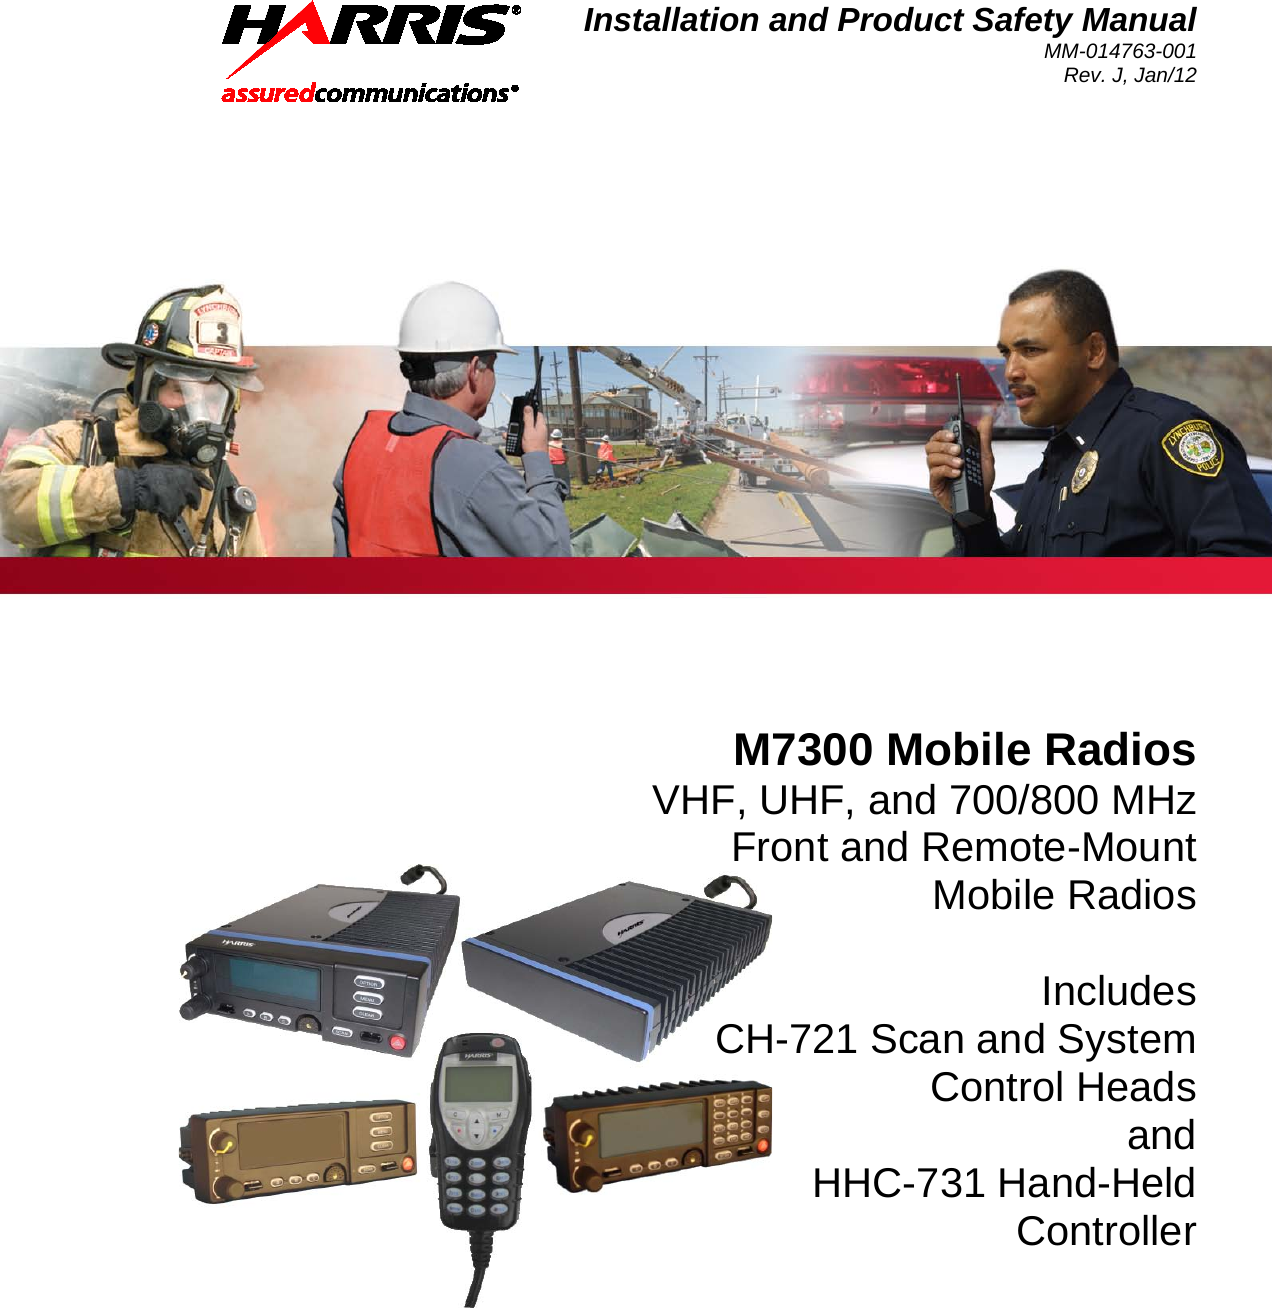 Installation and Product Safety Manual MM-014763-001 Rev. J, Jan/12   M7300 Mobile Radios VHF, UHF, and 700/800 MHz Front and Remote-Mount Mobile Radios  Includes CH-721 Scan and System Control Heads and HHC-731 Hand-Held Controller  